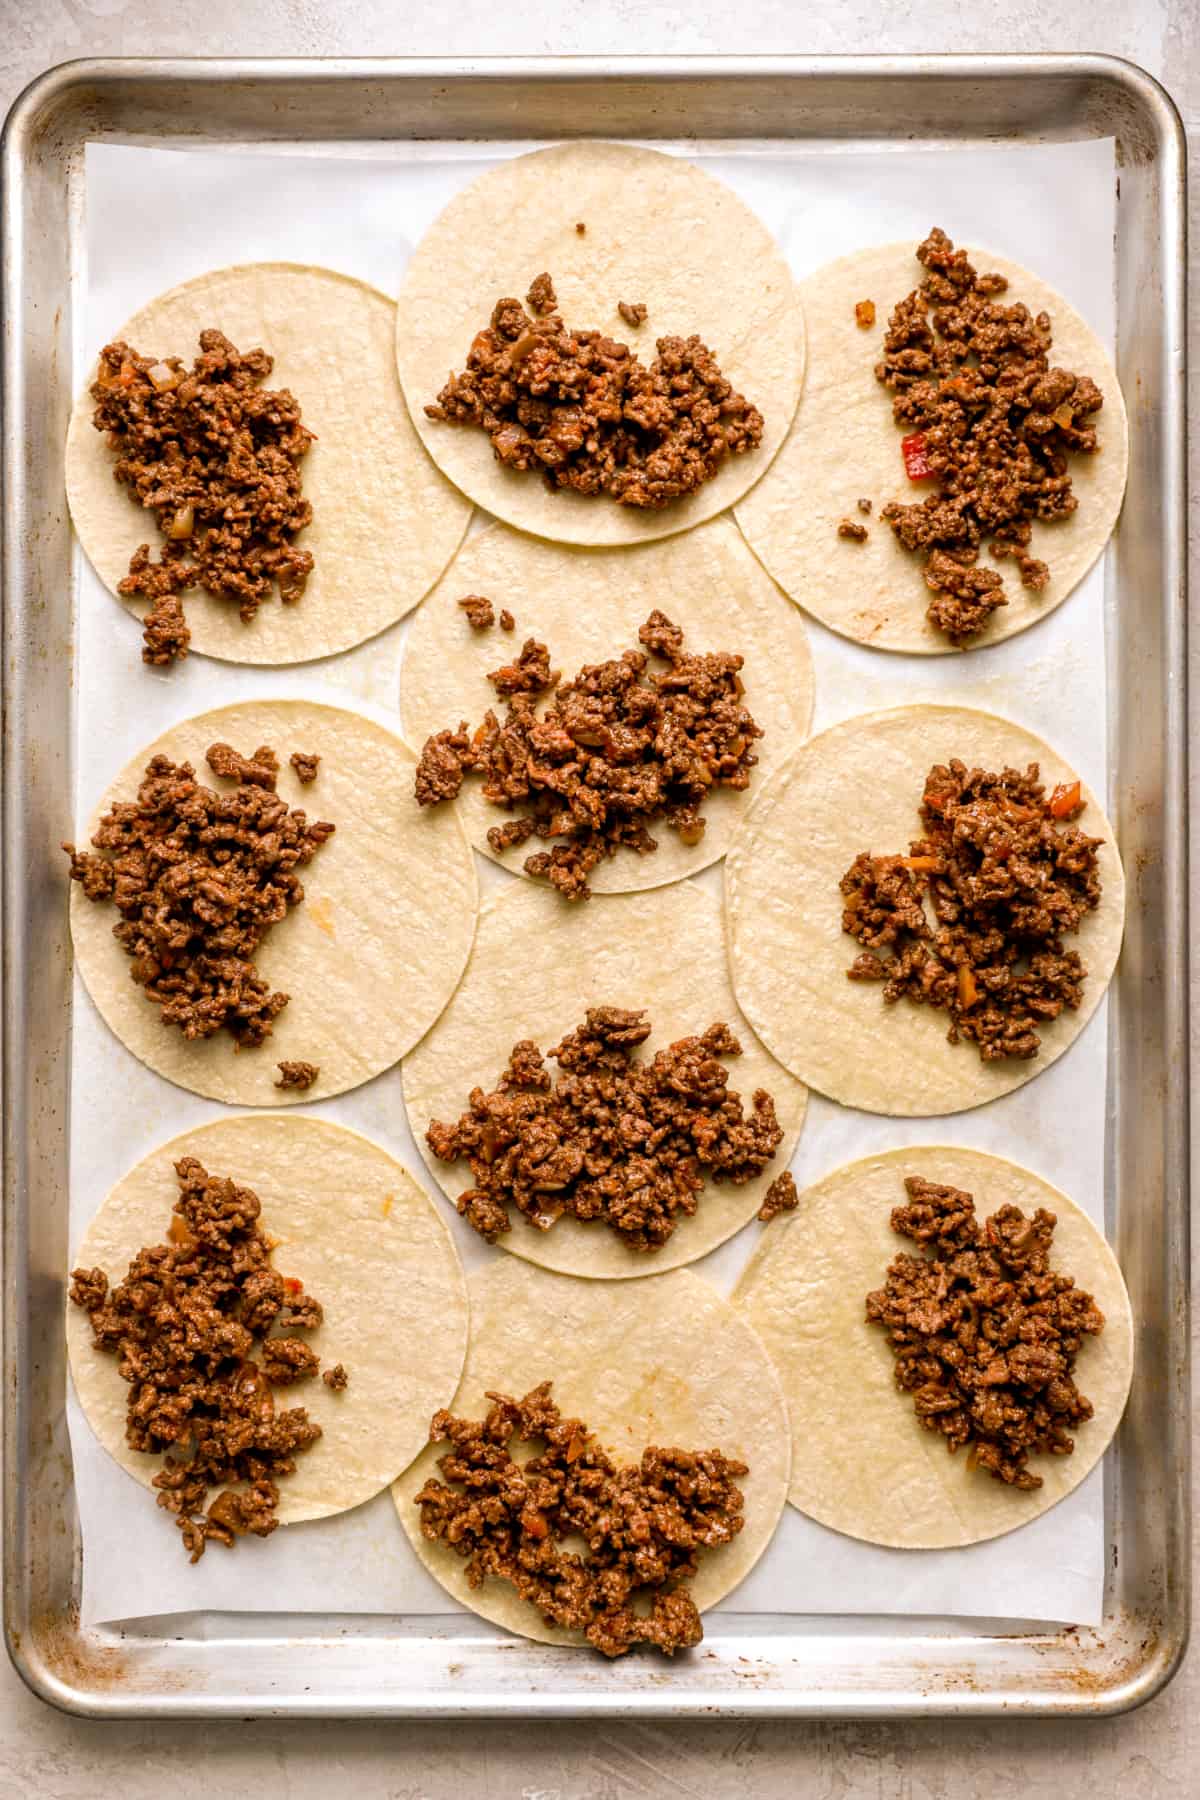 corn tortillas on a baking sheet topped with ground beef.